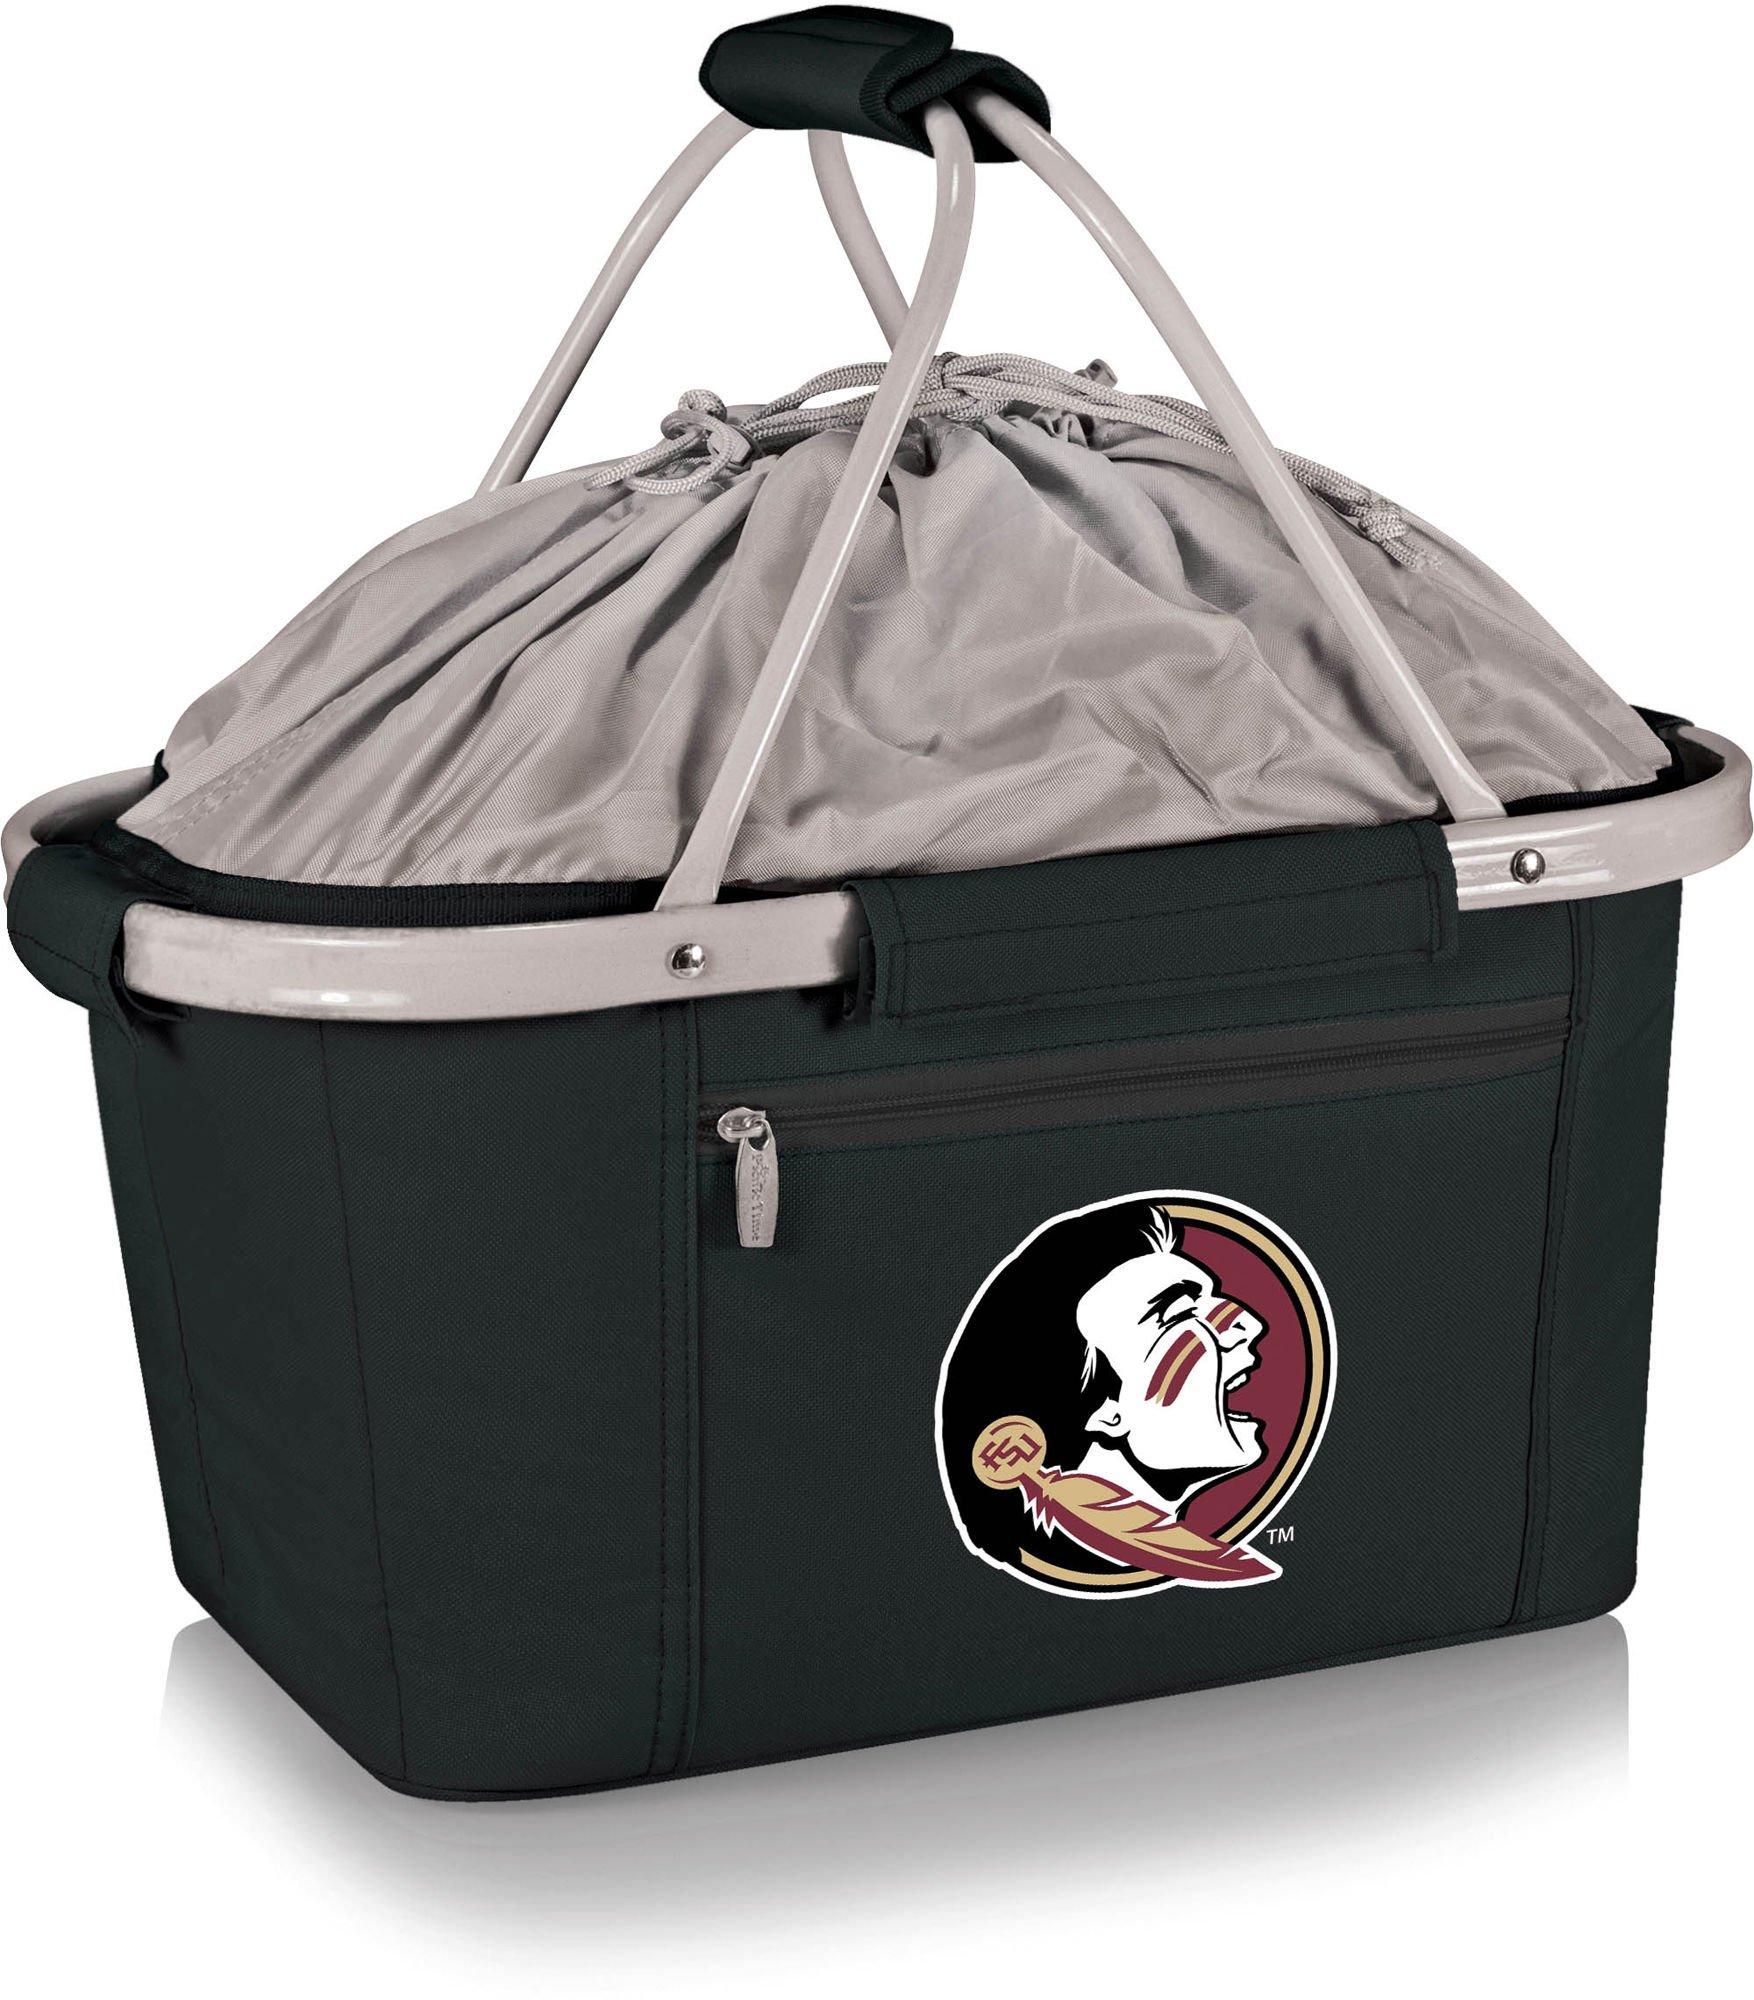 Florida State Metro Basket Tote by Oniva